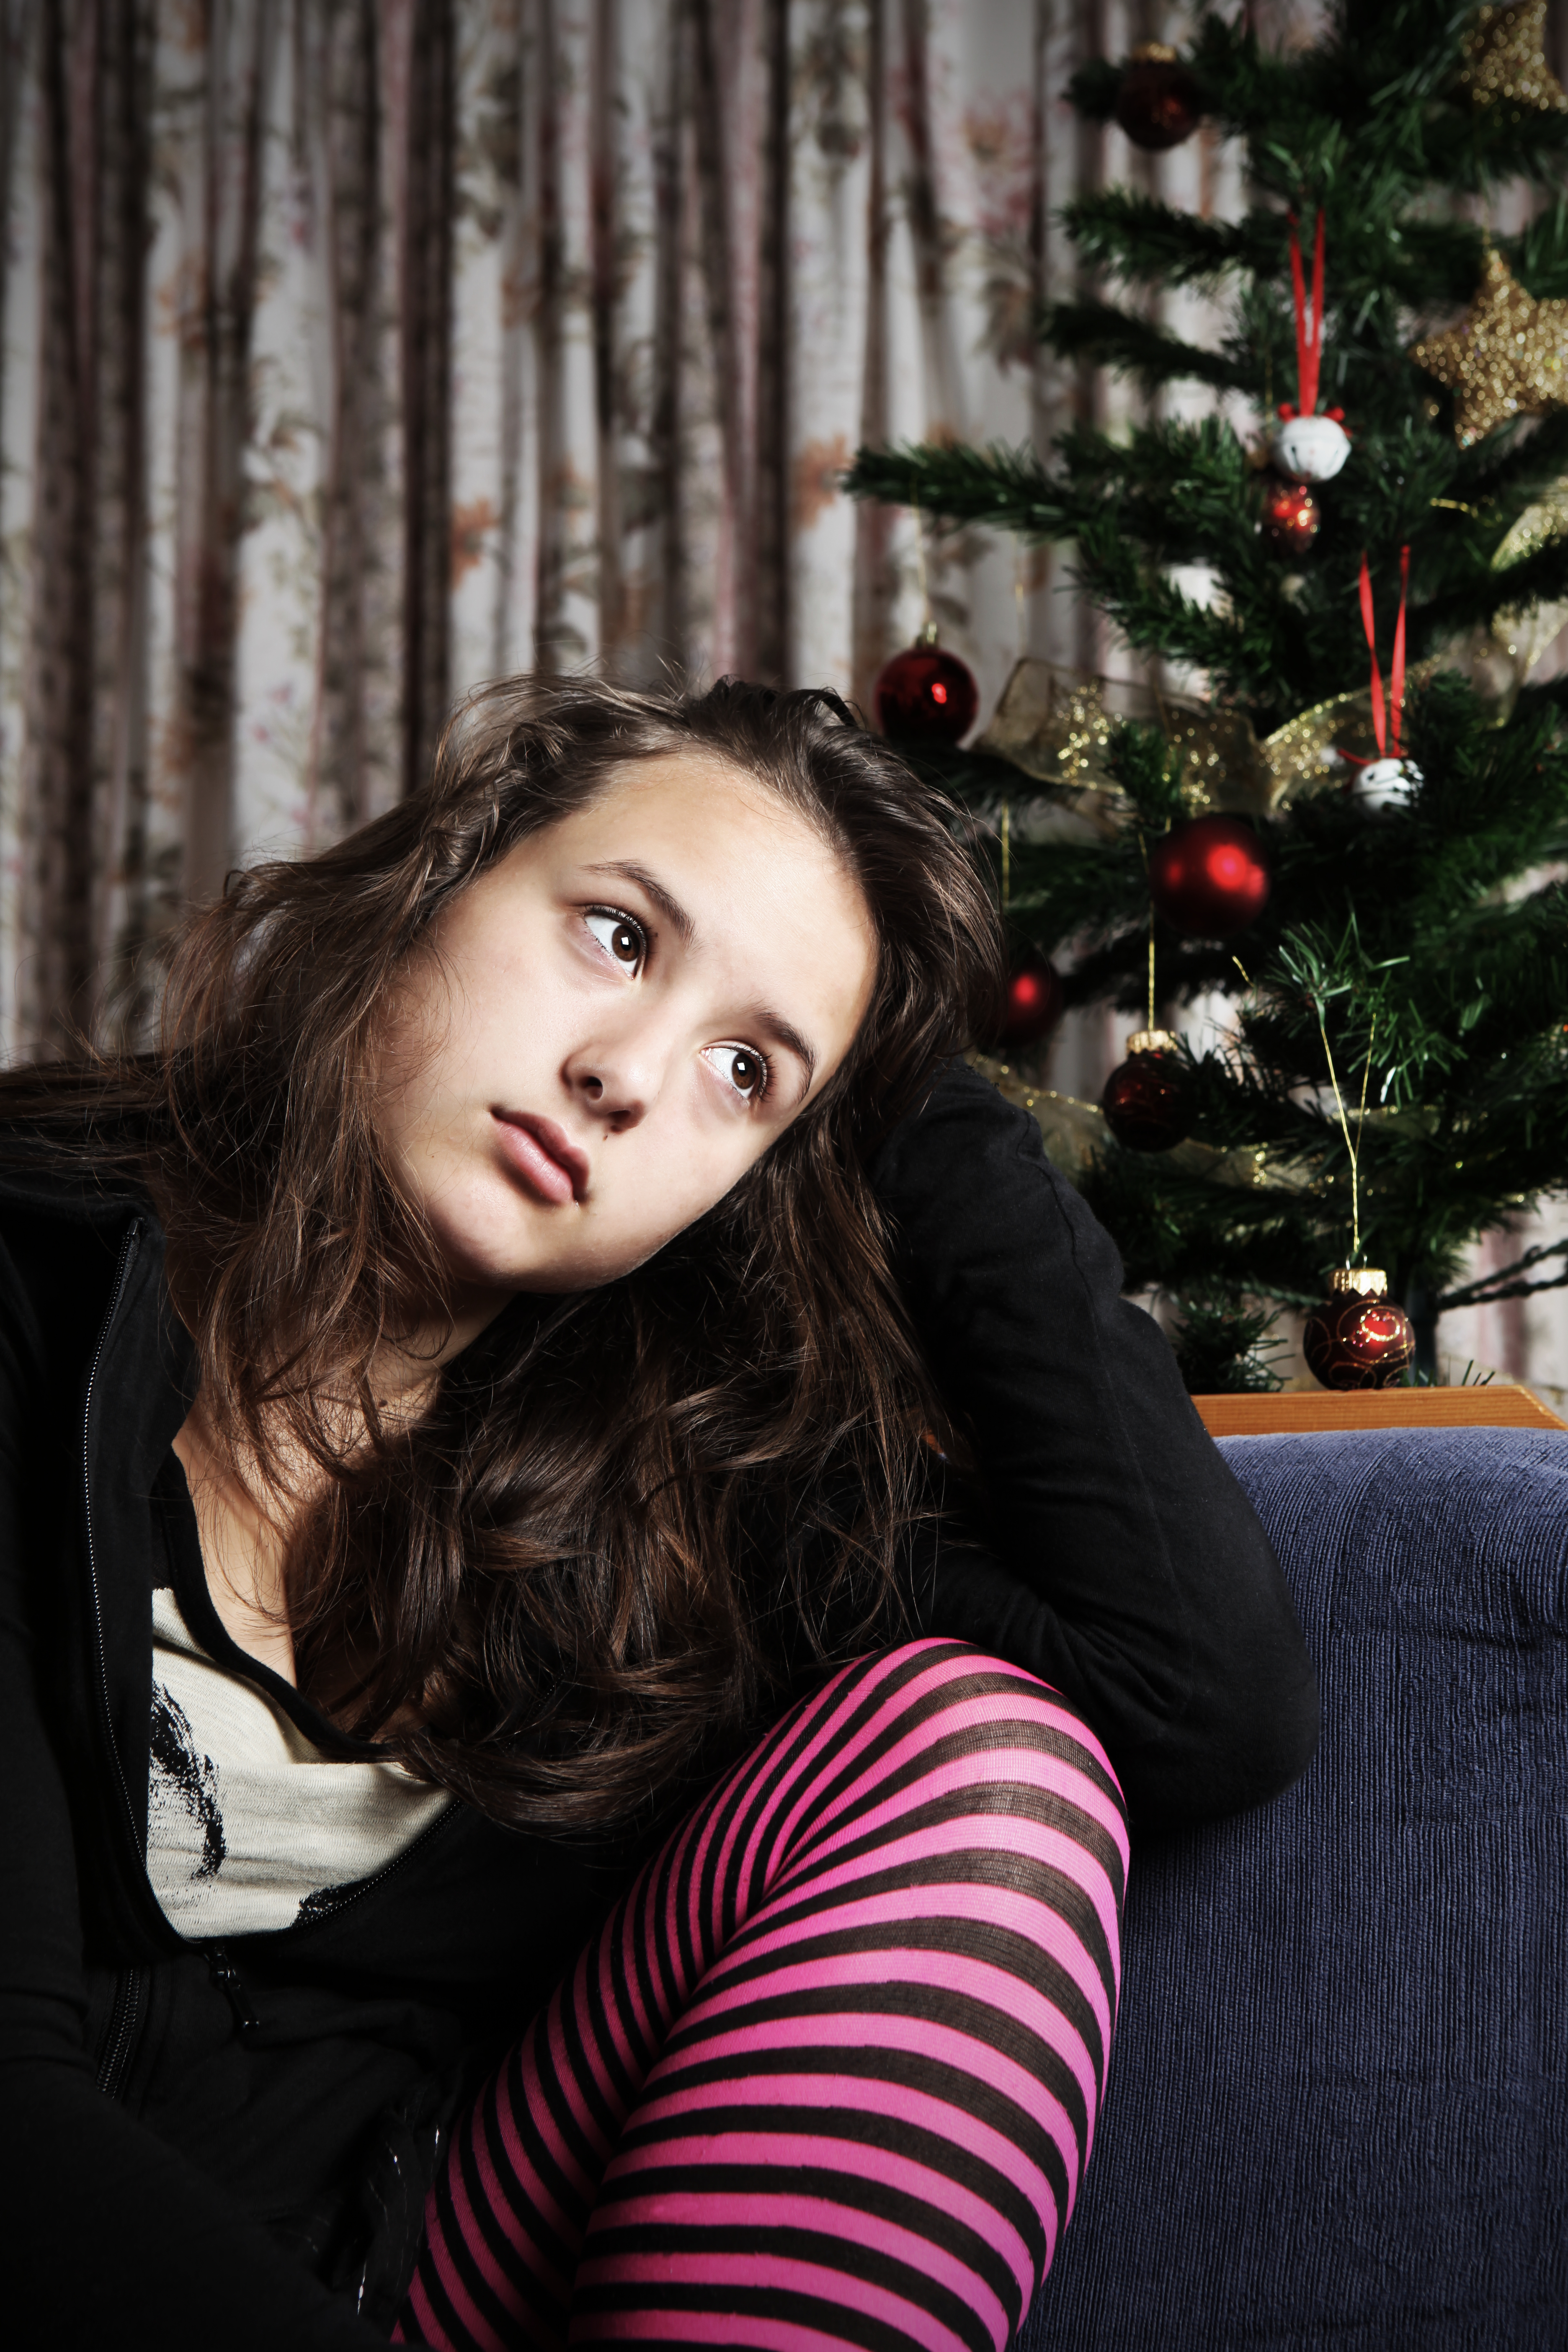 A sad teenage girl sitting next to a Christmas tree | Source: Getty Images